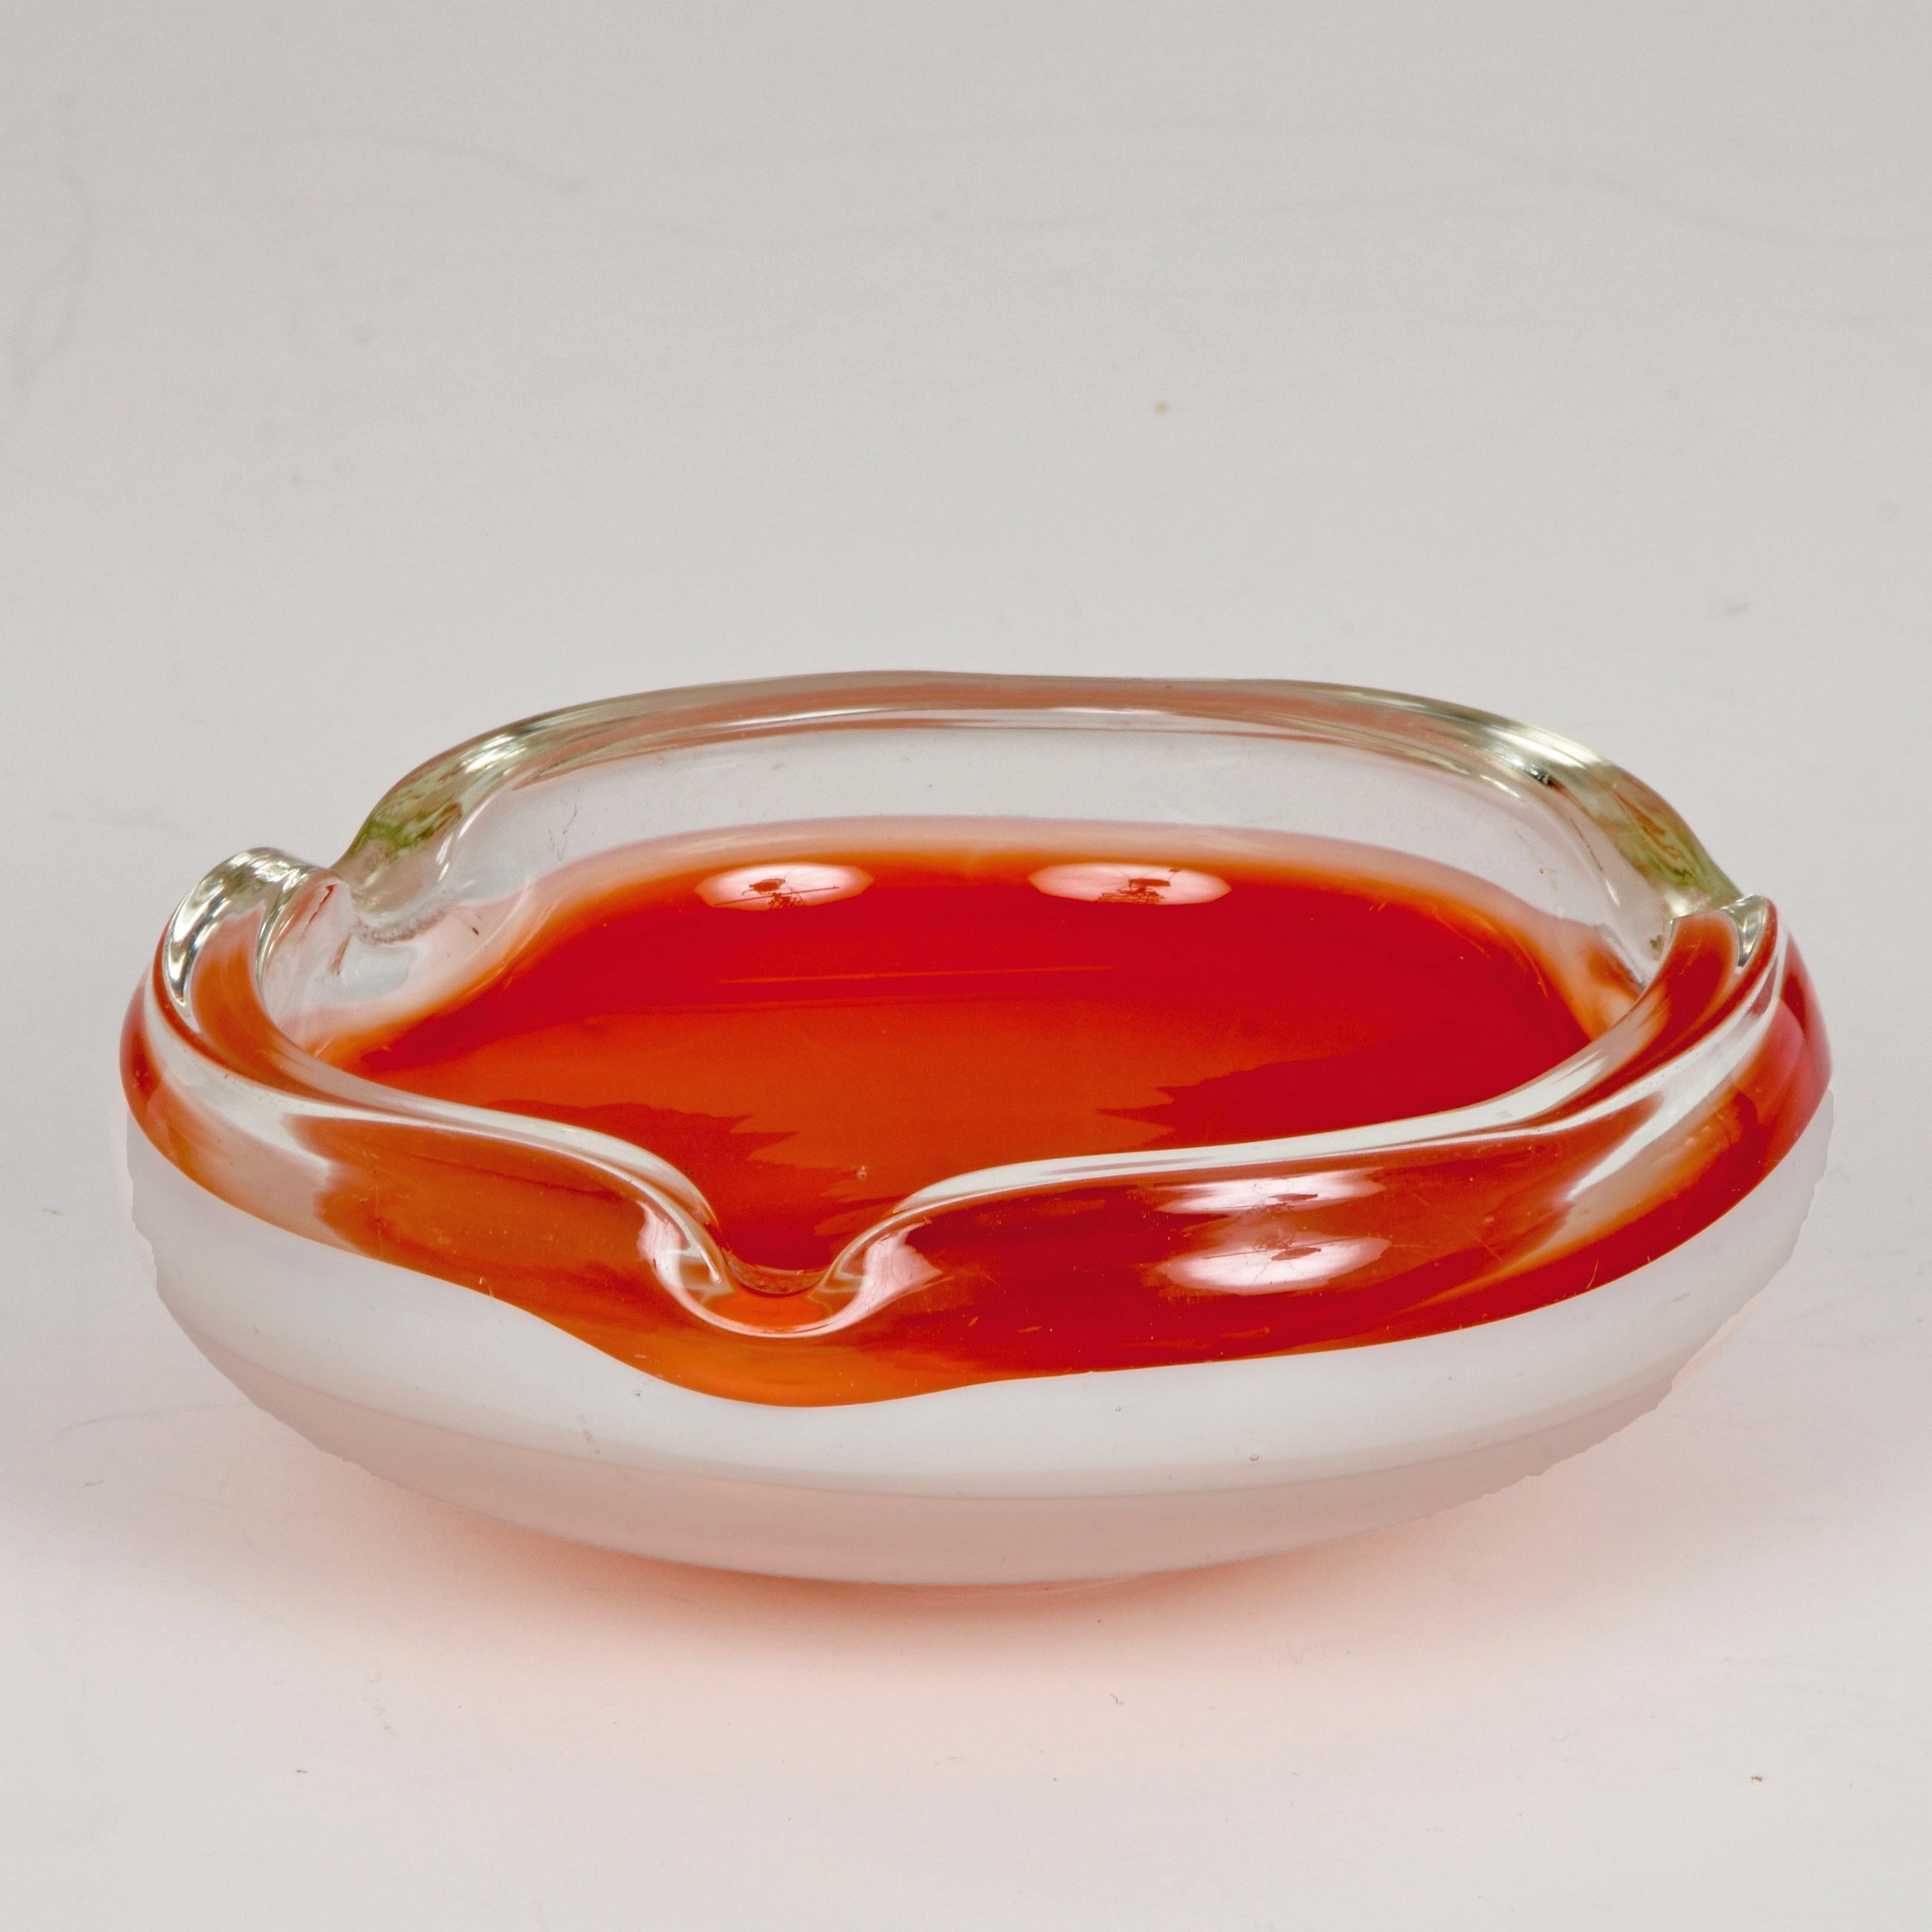 Midcentury Orange and White Murano Glass Italian Bowl or Ashtray, 1960s In Good Condition For Sale In Roma, IT